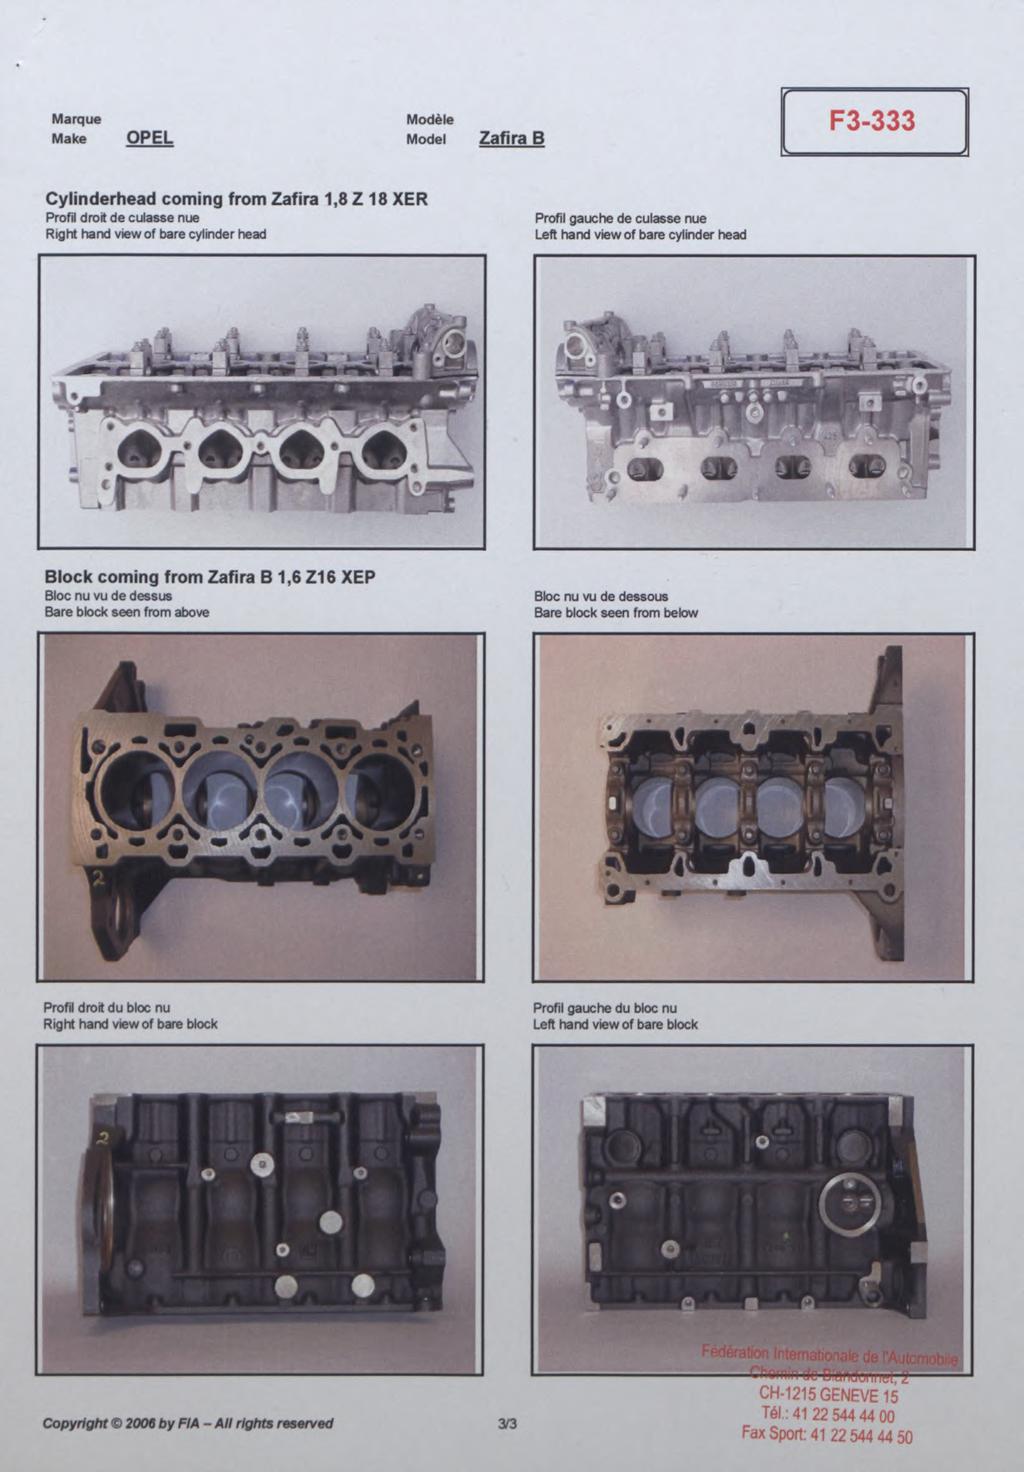 Marque Model Cylinderhead coming from Zafira 1,8 Z 18 XER Profil droit de culasse nue Right hand view of t>are cylinder head Profil gauche de culasse nue Left hand view of bare cylinder head ( n 9 w